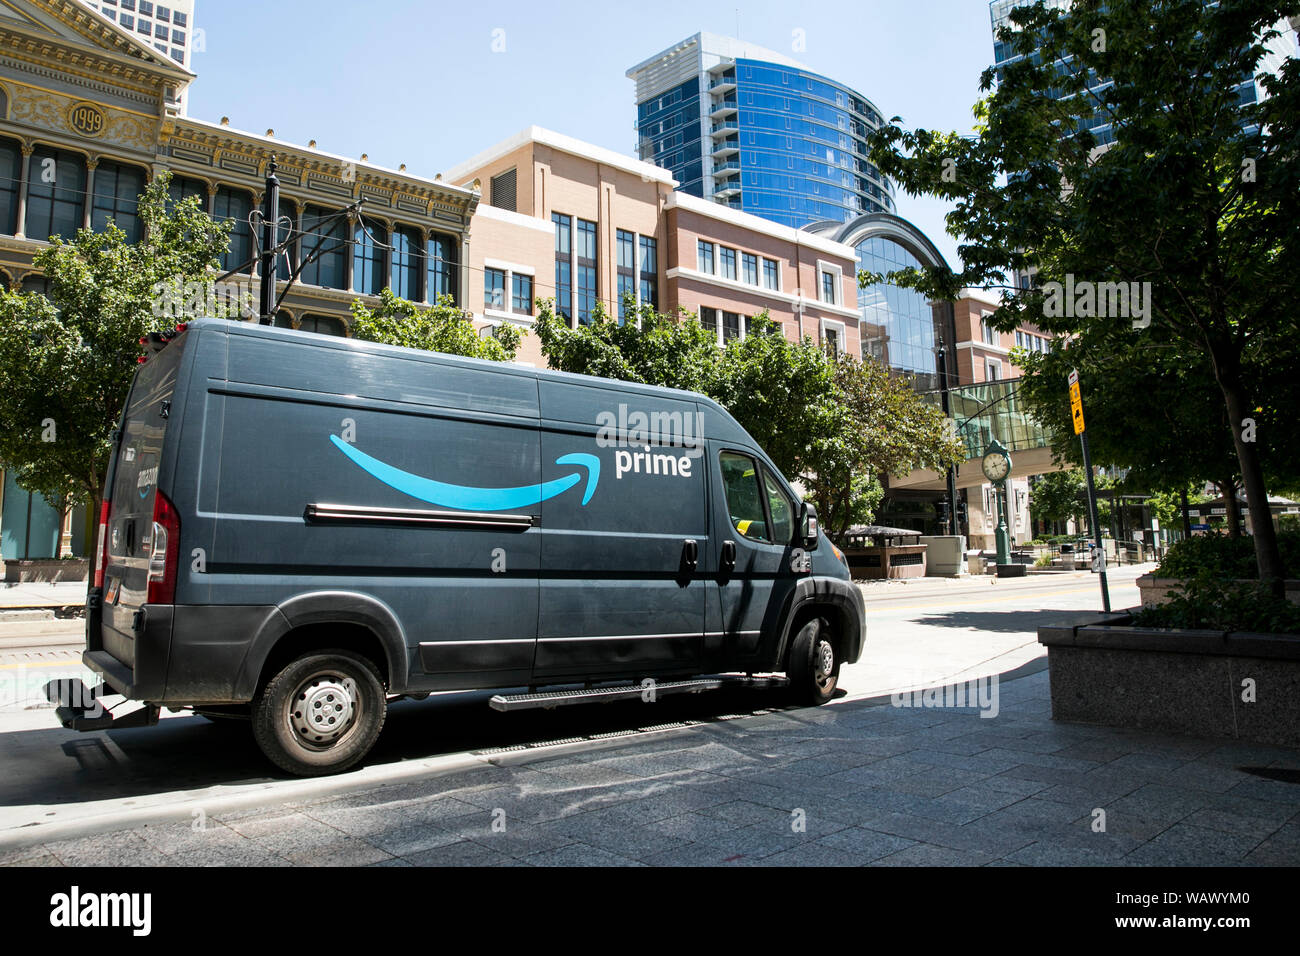 https://c8.alamy.com/comp/WAWYM0/a-logo-sign-on-an-amazon-prime-delivery-van-in-salt-lake-city-utah-on-july-28-2019-WAWYM0.jpg